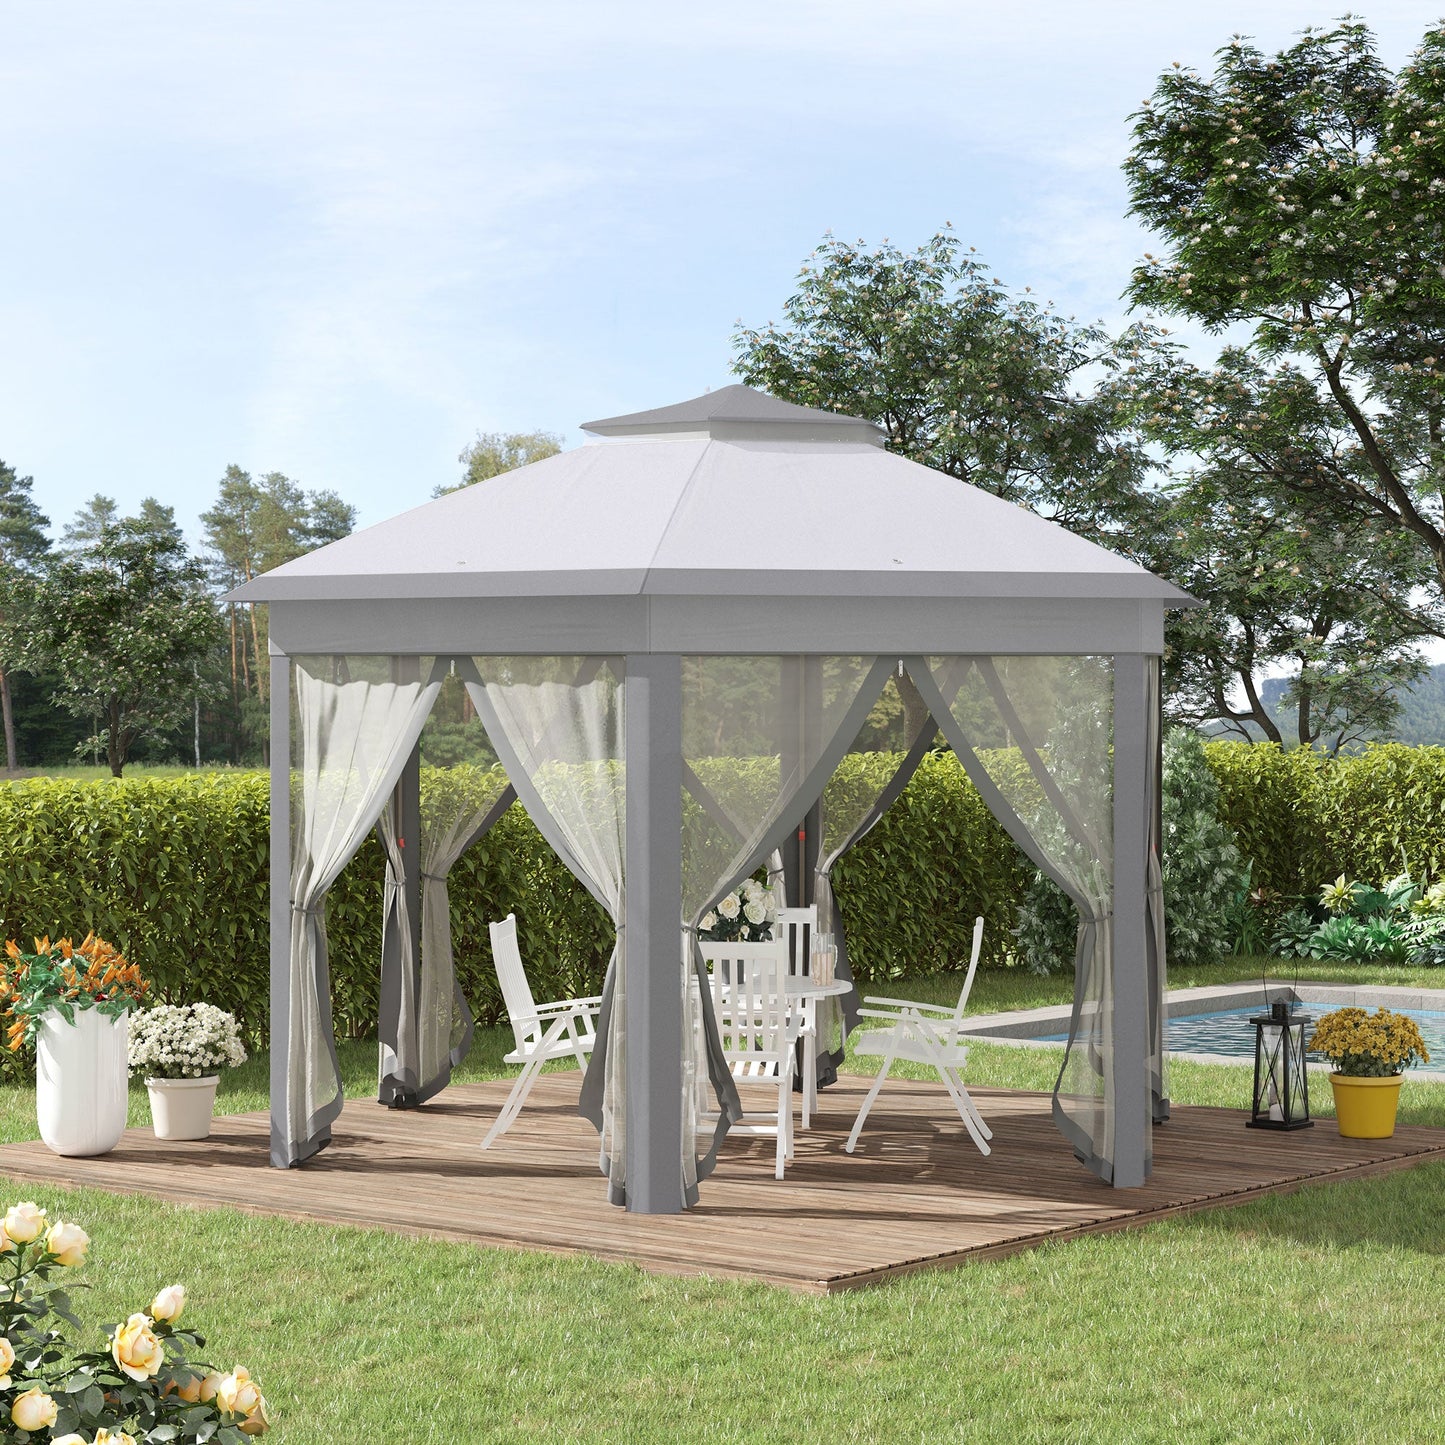 -Outsunny 13' x 13' Pop Up Gazebo Hexagonal Canopy Shelter with 6 Zippered Mesh Netting for Patio Backyard Garden Wedding Party - Outdoor Style Company